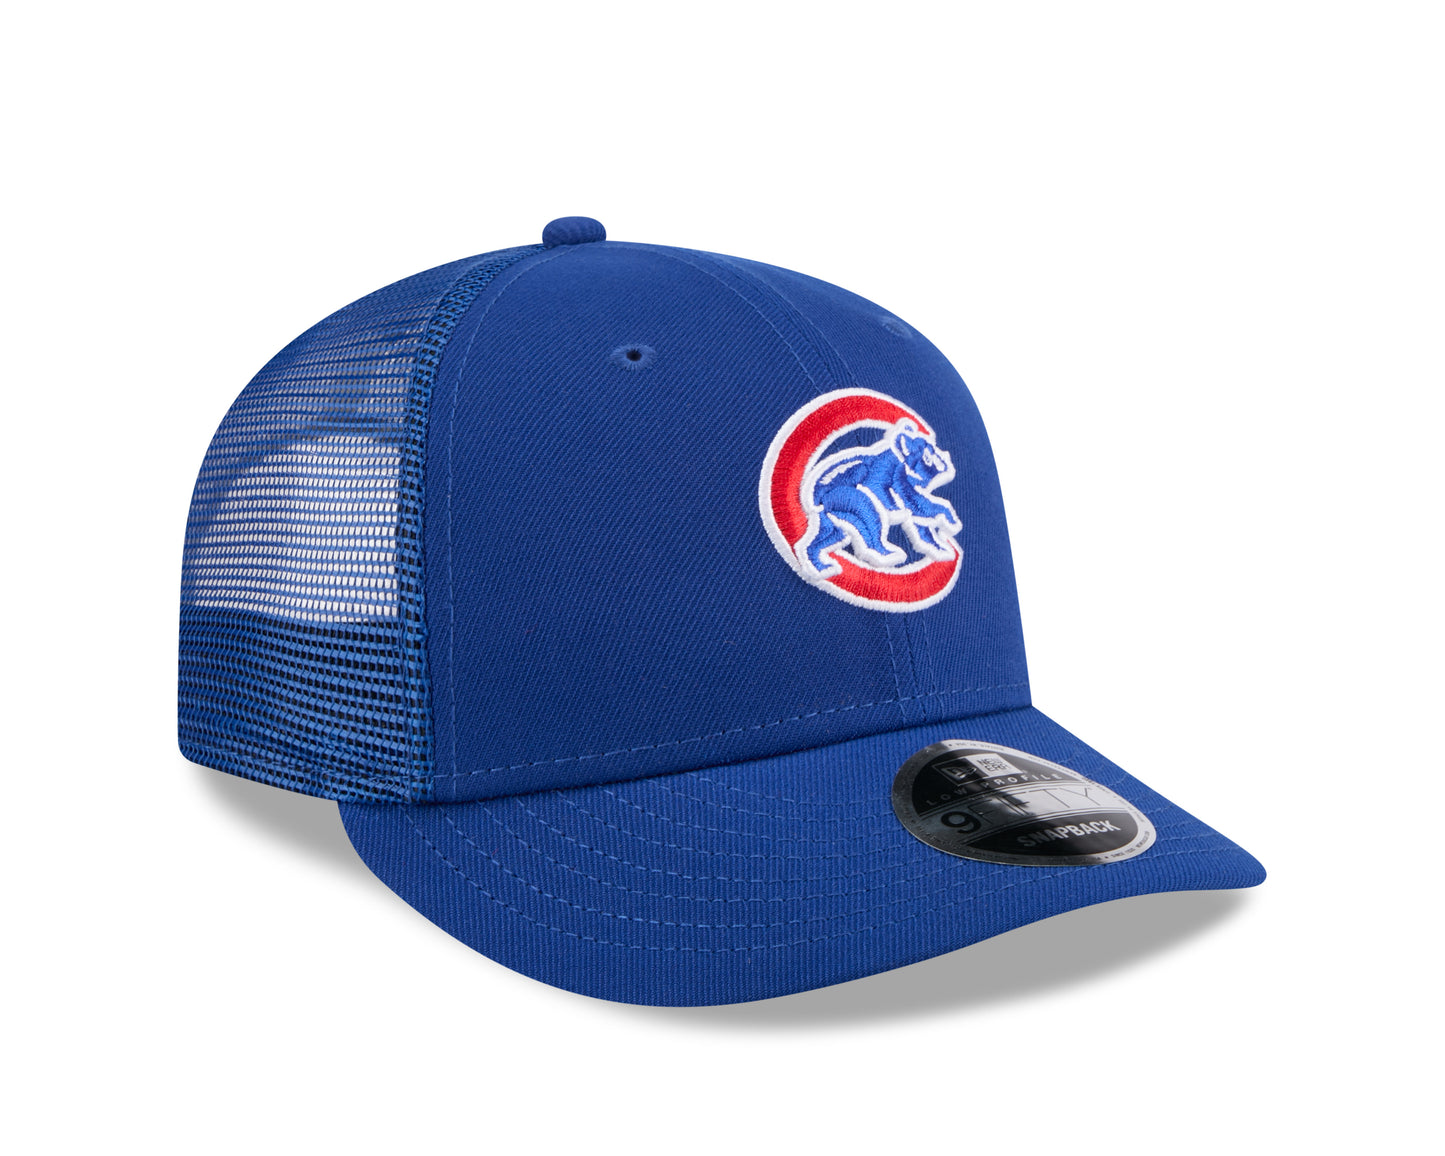 Chicago Cubs New Era Royal Blue Alternate Trucker Low Profile 9FIFTY Snapback Adjustable Hat